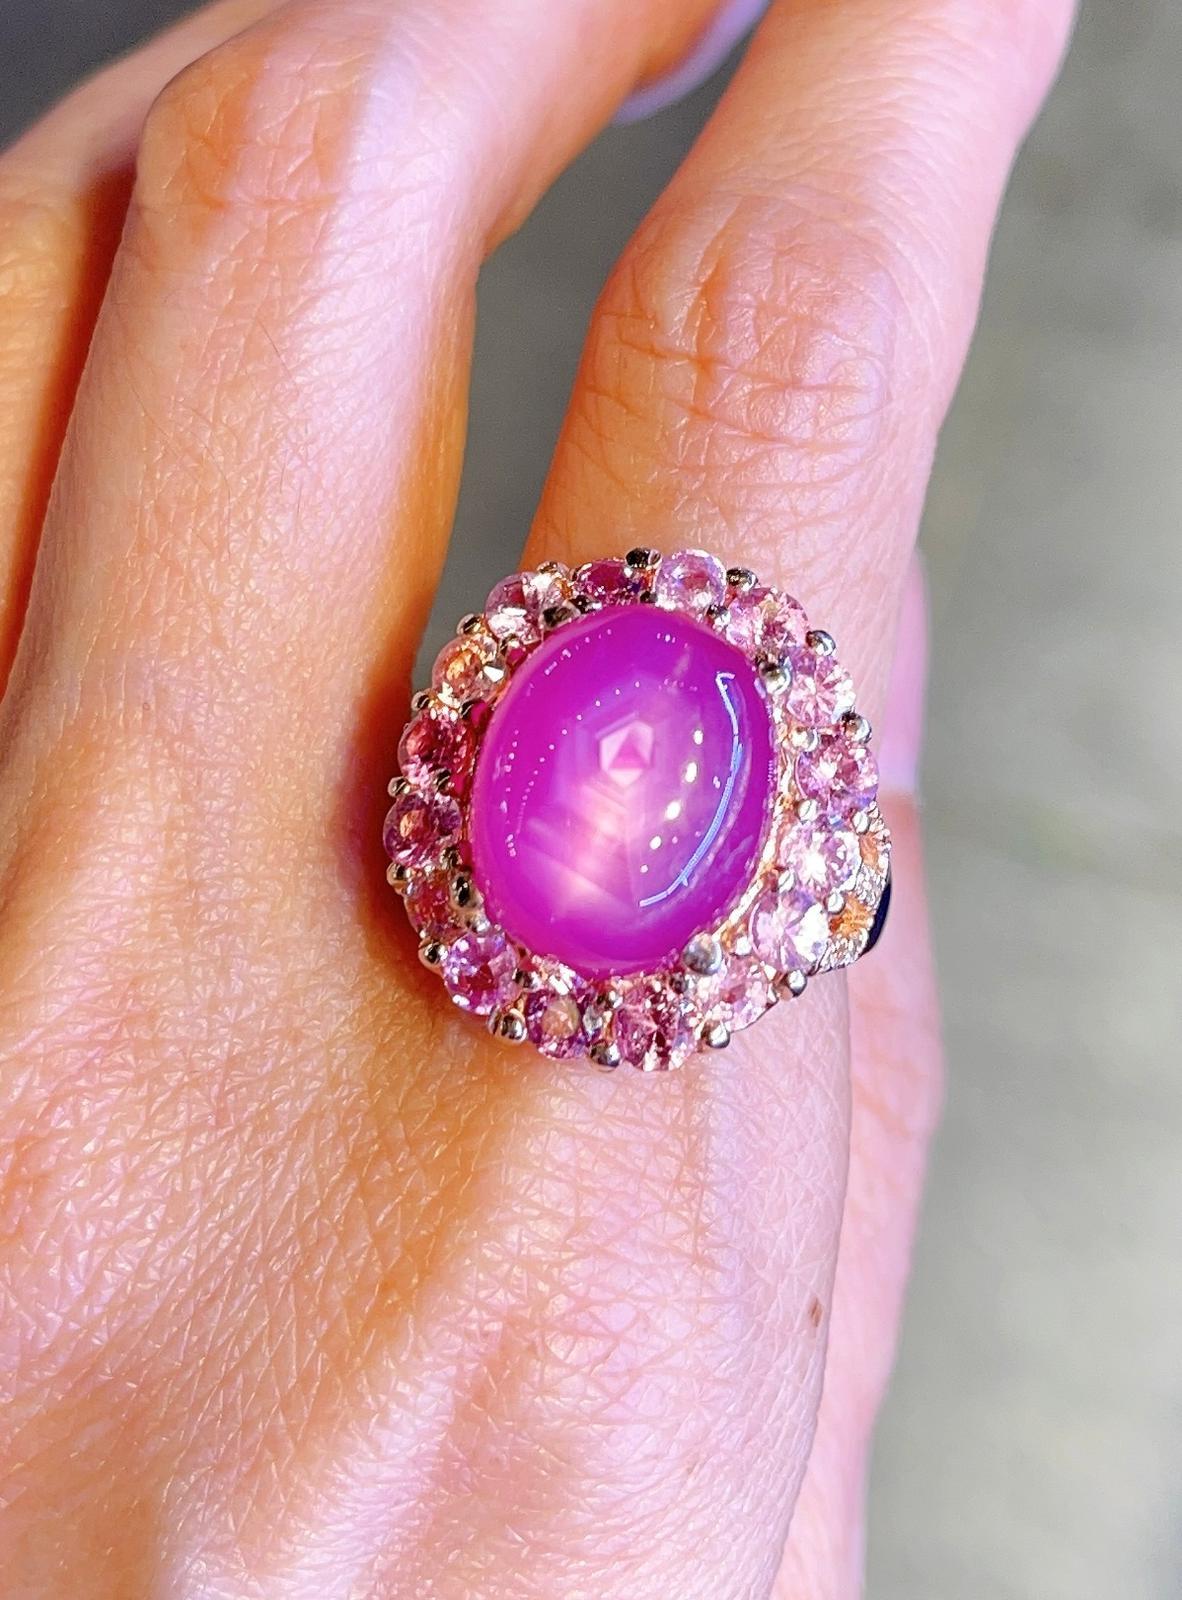 Bochic “Capri” Star Ruby Ring with Pink Sapphires 
Set in 22 Gold & Silver 
Natural Star Ruby Center Cabochon - 24 carats 
Natural Pink Sapphires cluster all around the ruby  - 9 carats 
Round brilliant shapes 
This Ring is perfect to wear day to